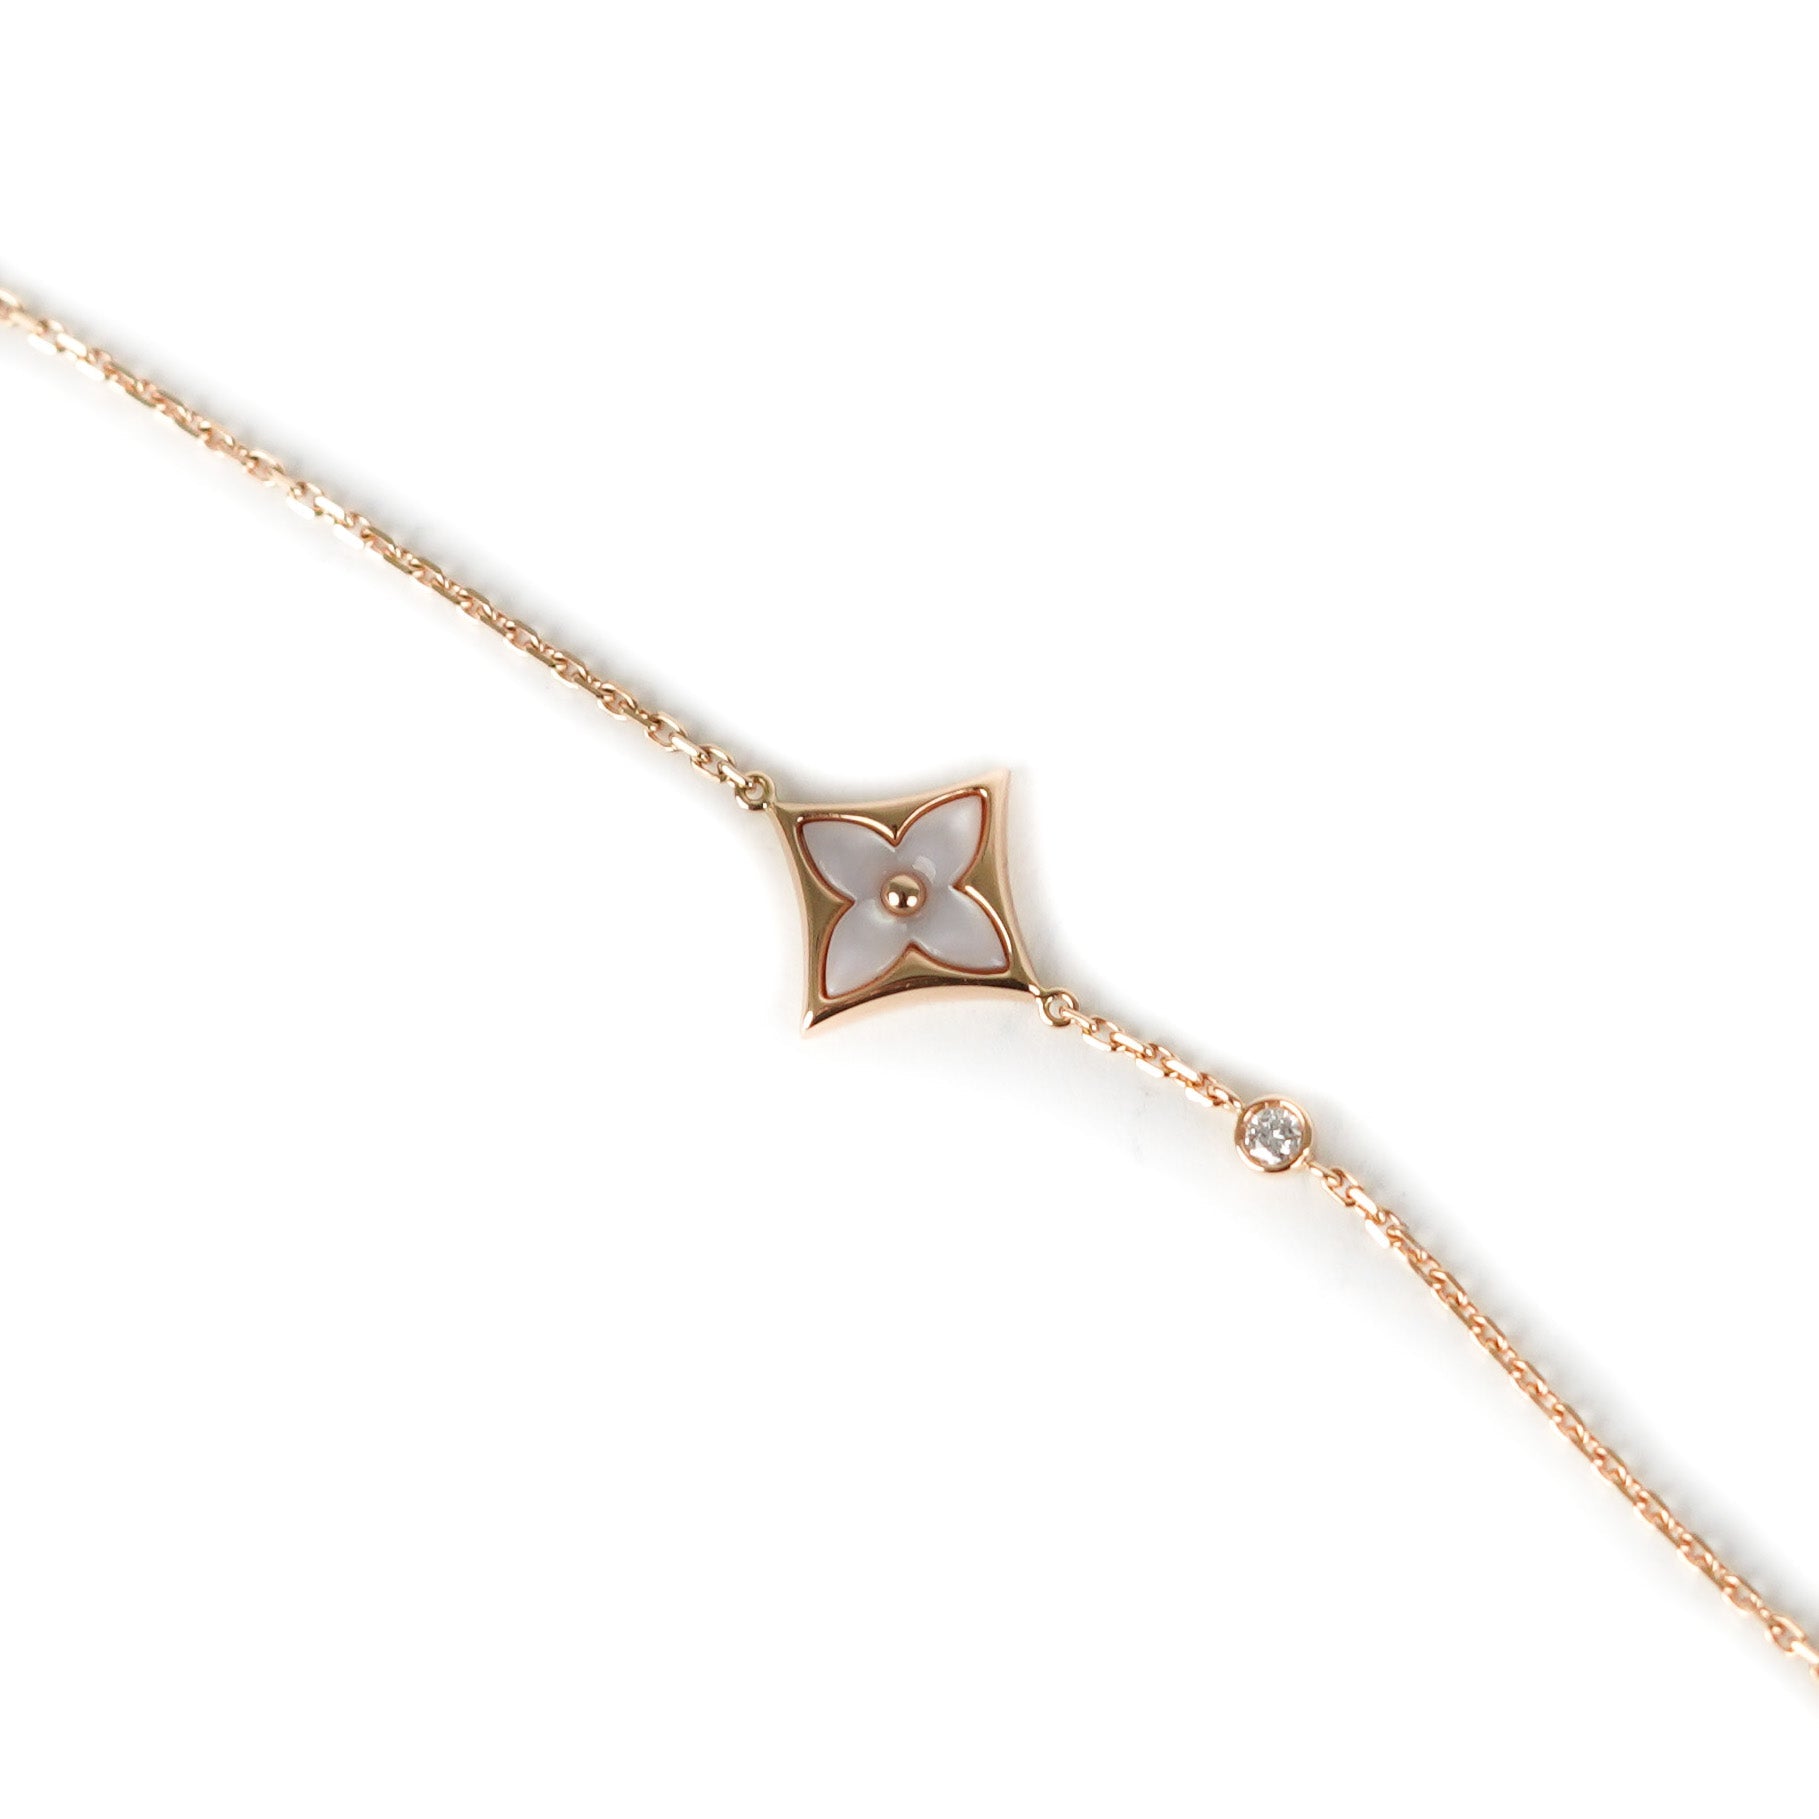 COLOR BLOSSOM BB STAR PENDANT, PINK GOLD, PINK MOTHER-OF-PEARL AND DIAMOND